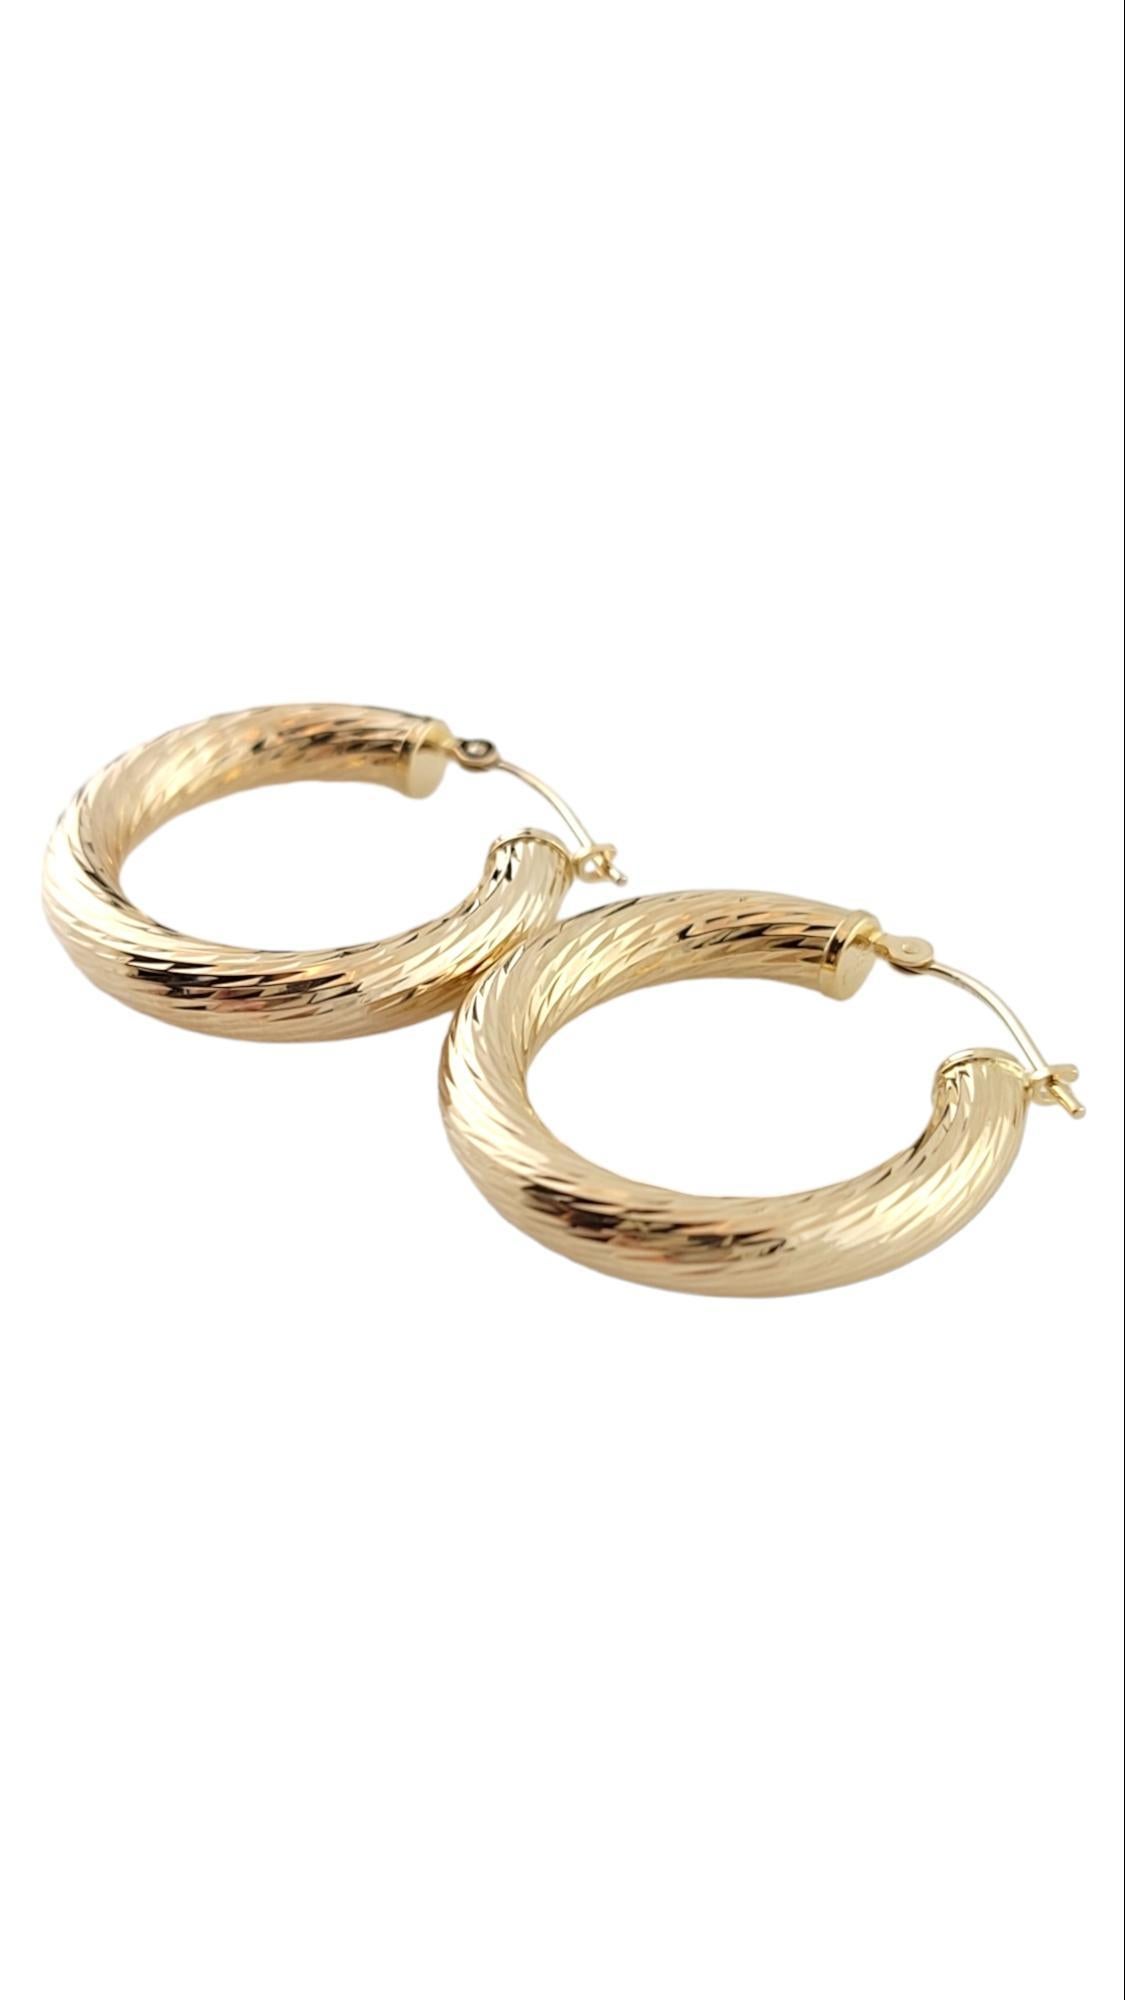 14K Yellow Gold Textured Hoop Earrings

Gorgeous set of classic hoop earrings crafted from 14K yellow gold with a beautiful textured finish!

Diameter: 25.65mm / 1.00